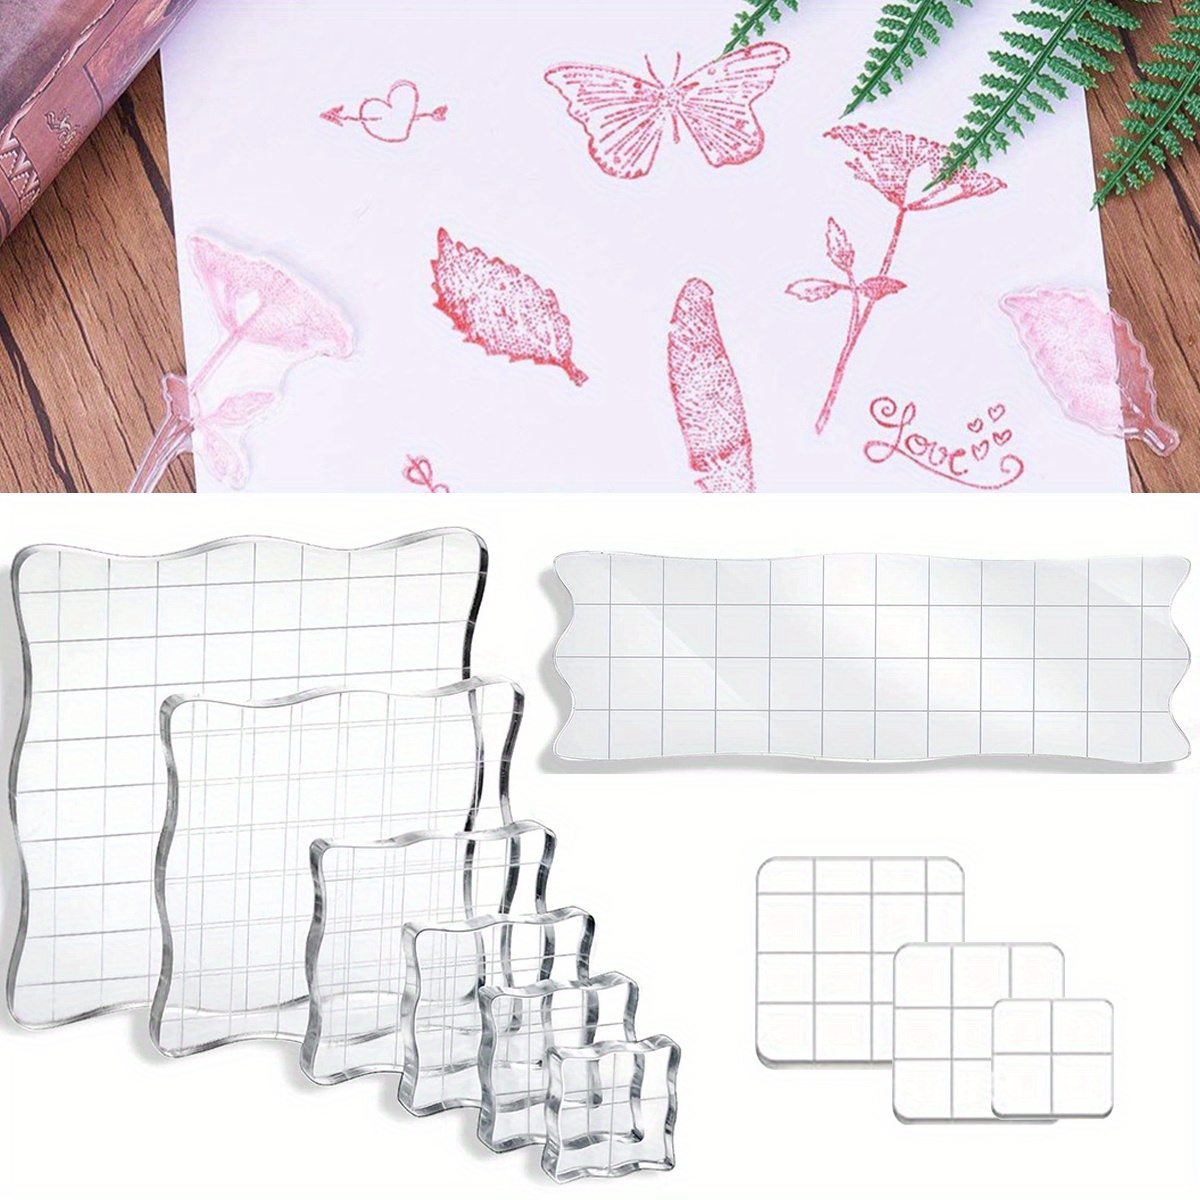 Acrylic Block Clear Stamp, Acrylic Stamp Block Stamping